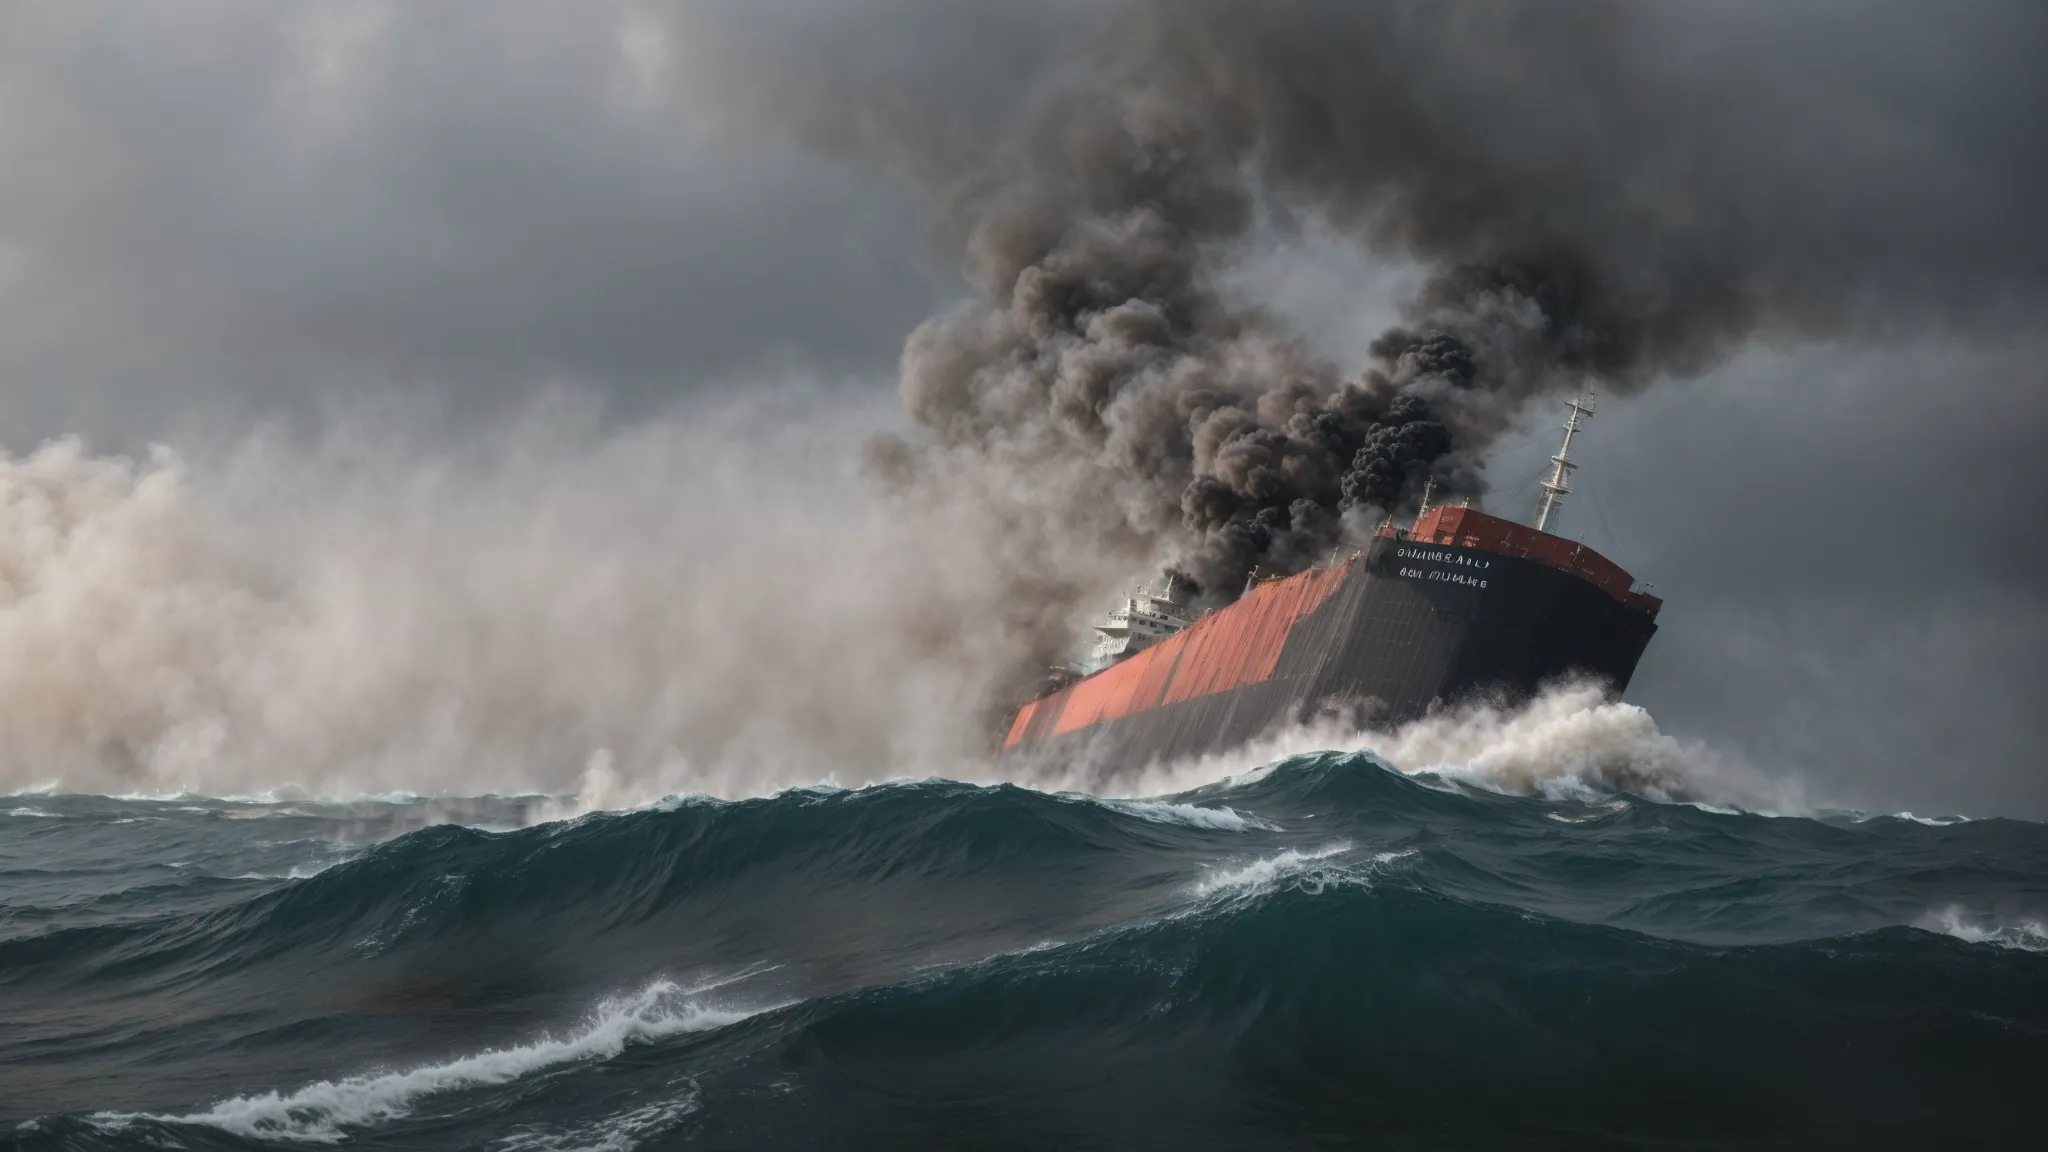 a damaged cargo ship adrift with smoke rising against a backdrop of turbulent sea waters.